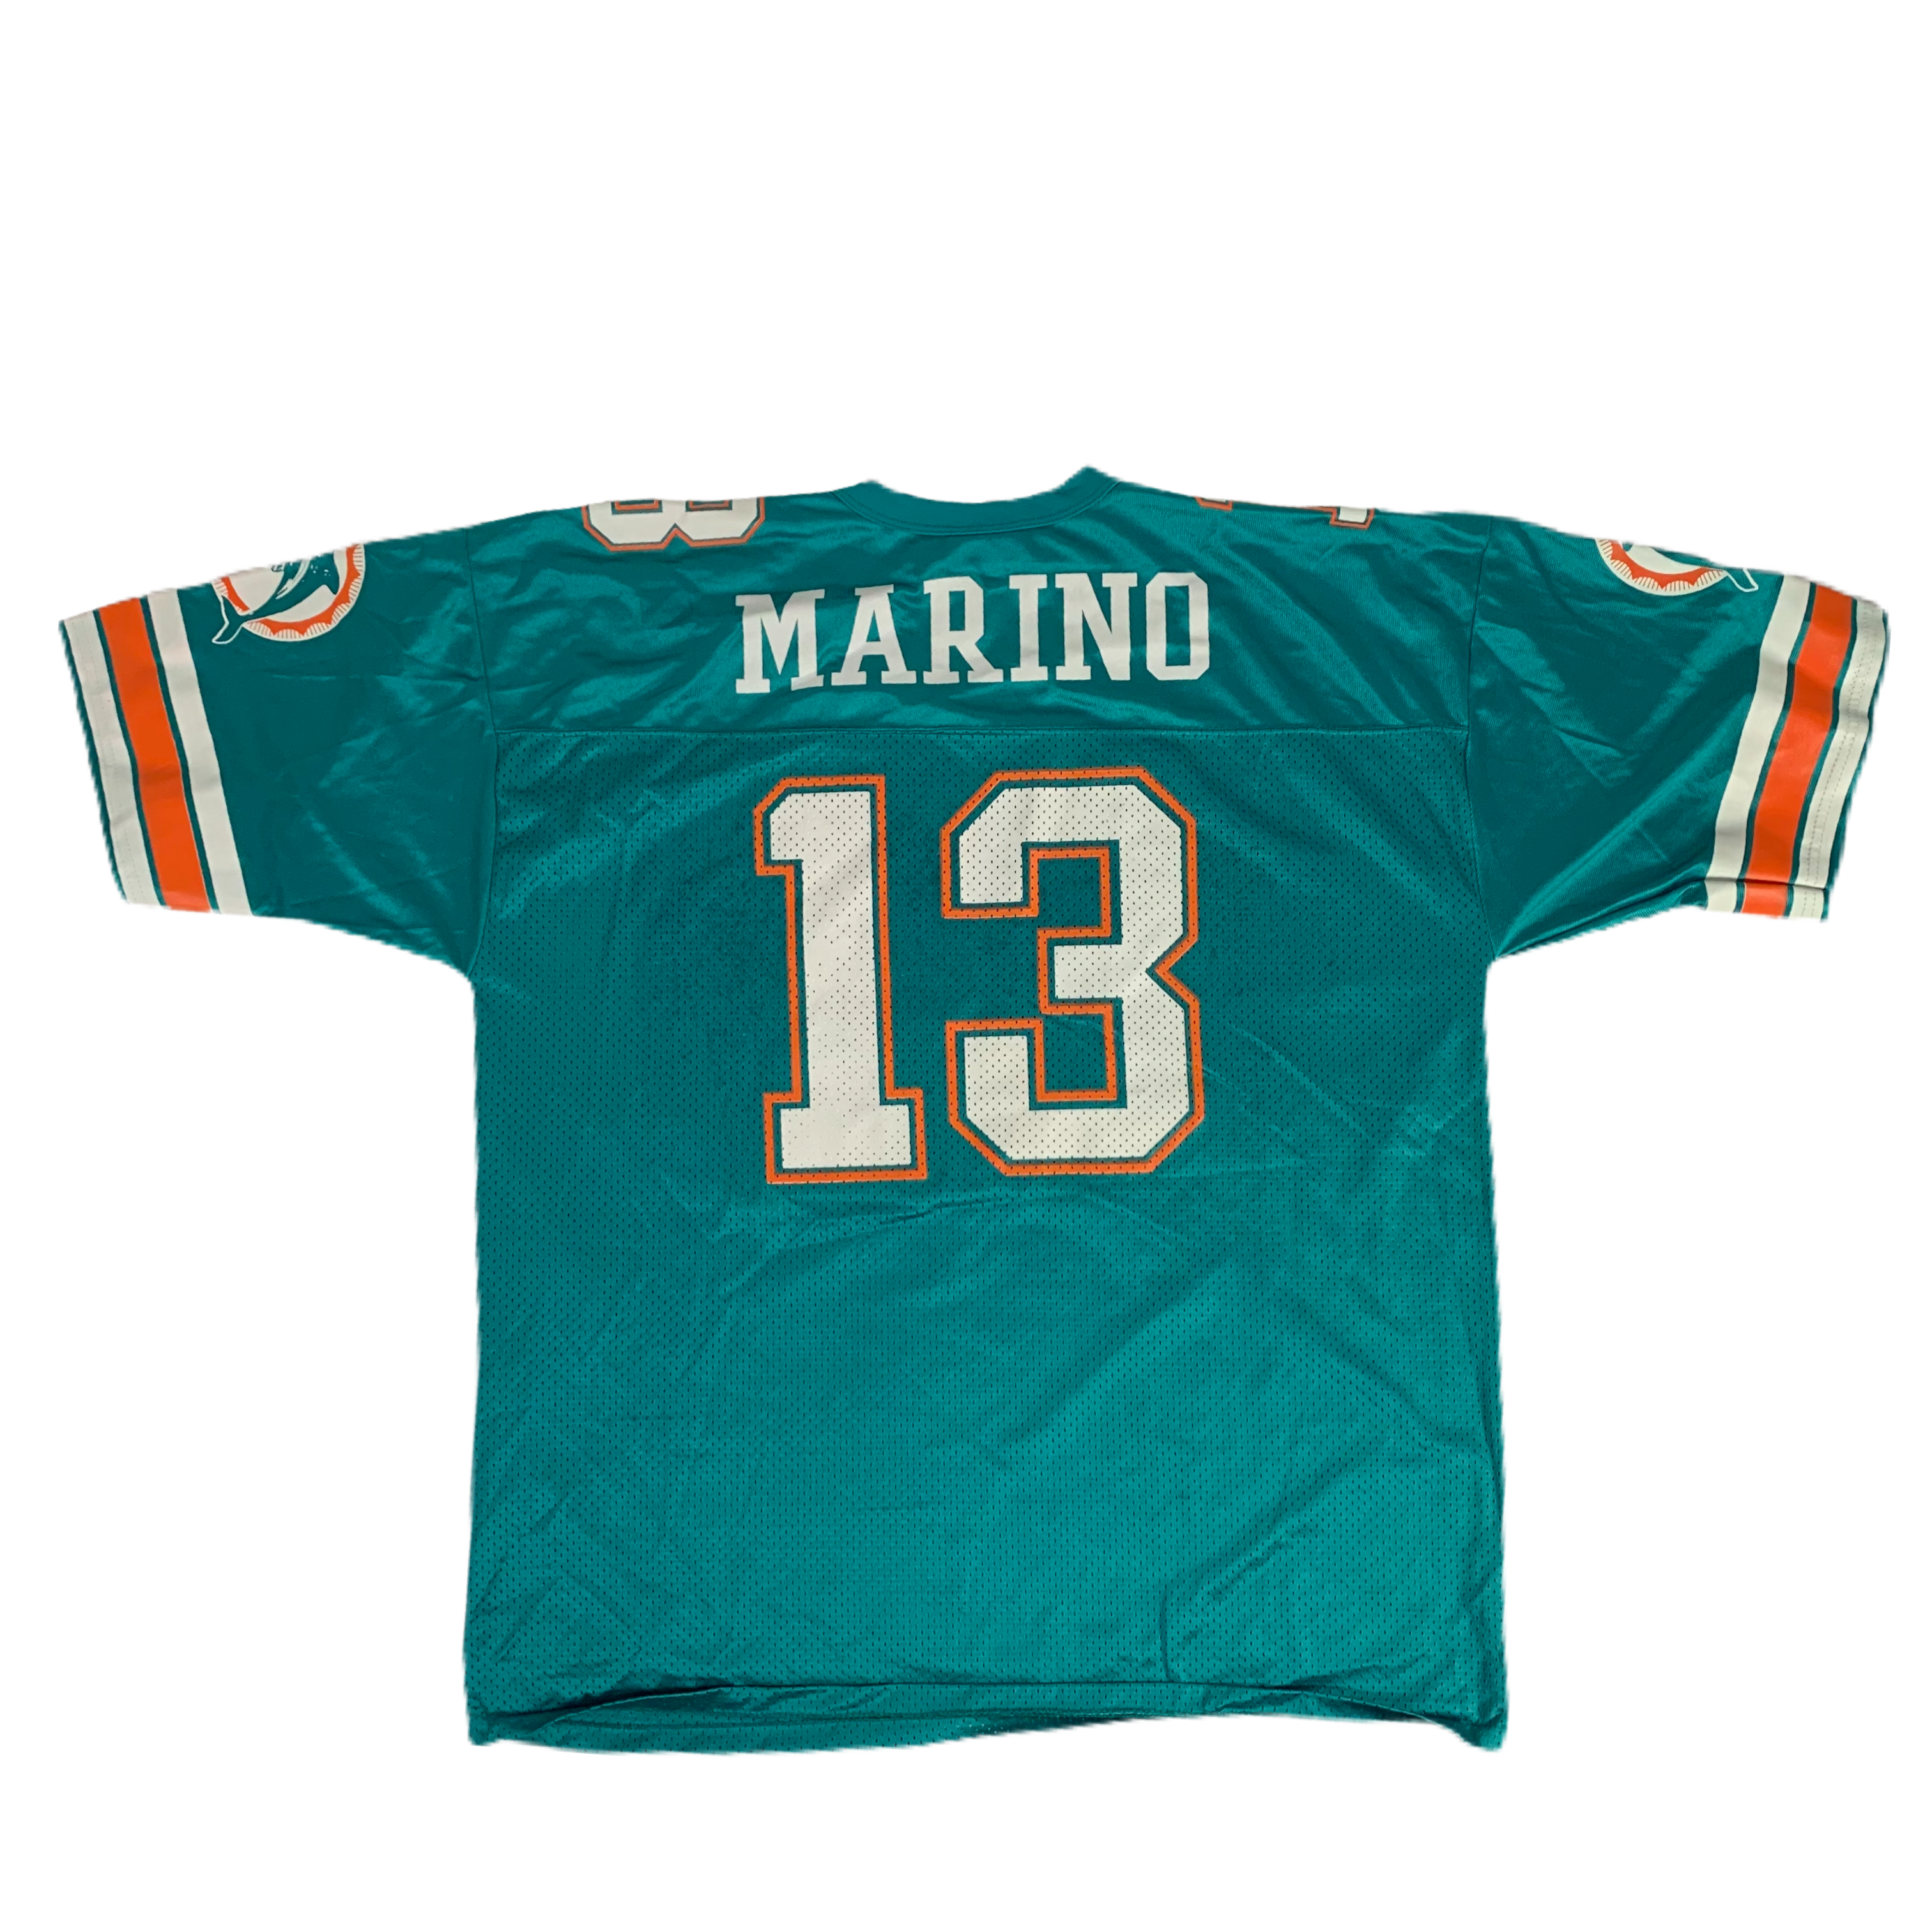 jersey dolphins miami